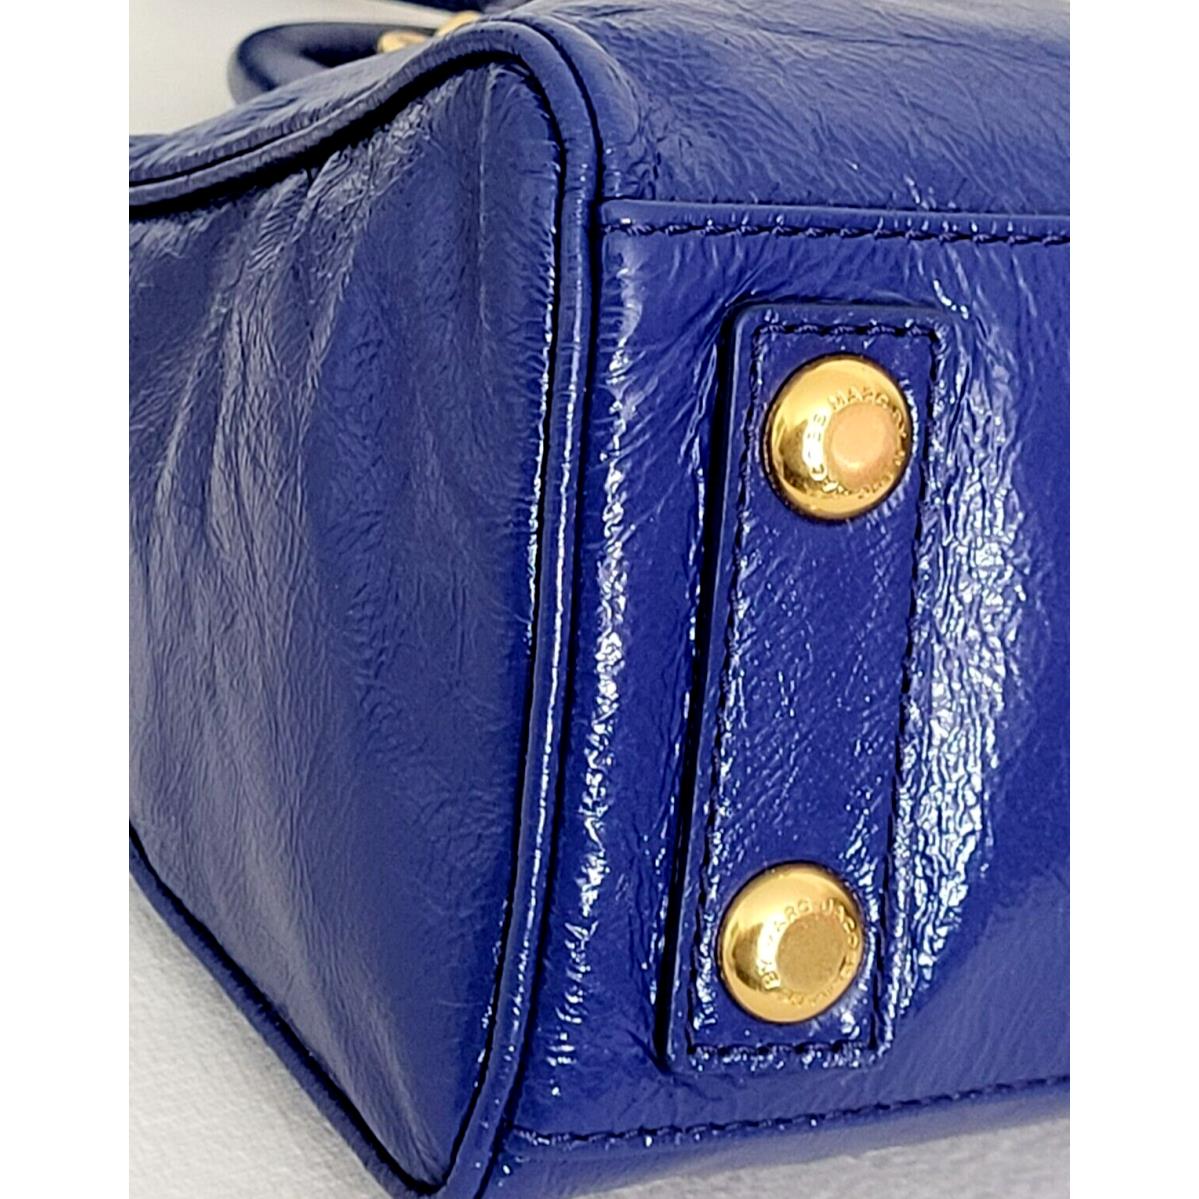 Marc Jacobs  bag  TOO HOT HANDLE - Blue Handle/Strap, Gold Hardware, BRIGHT ROYAL BLUE Exterior 10